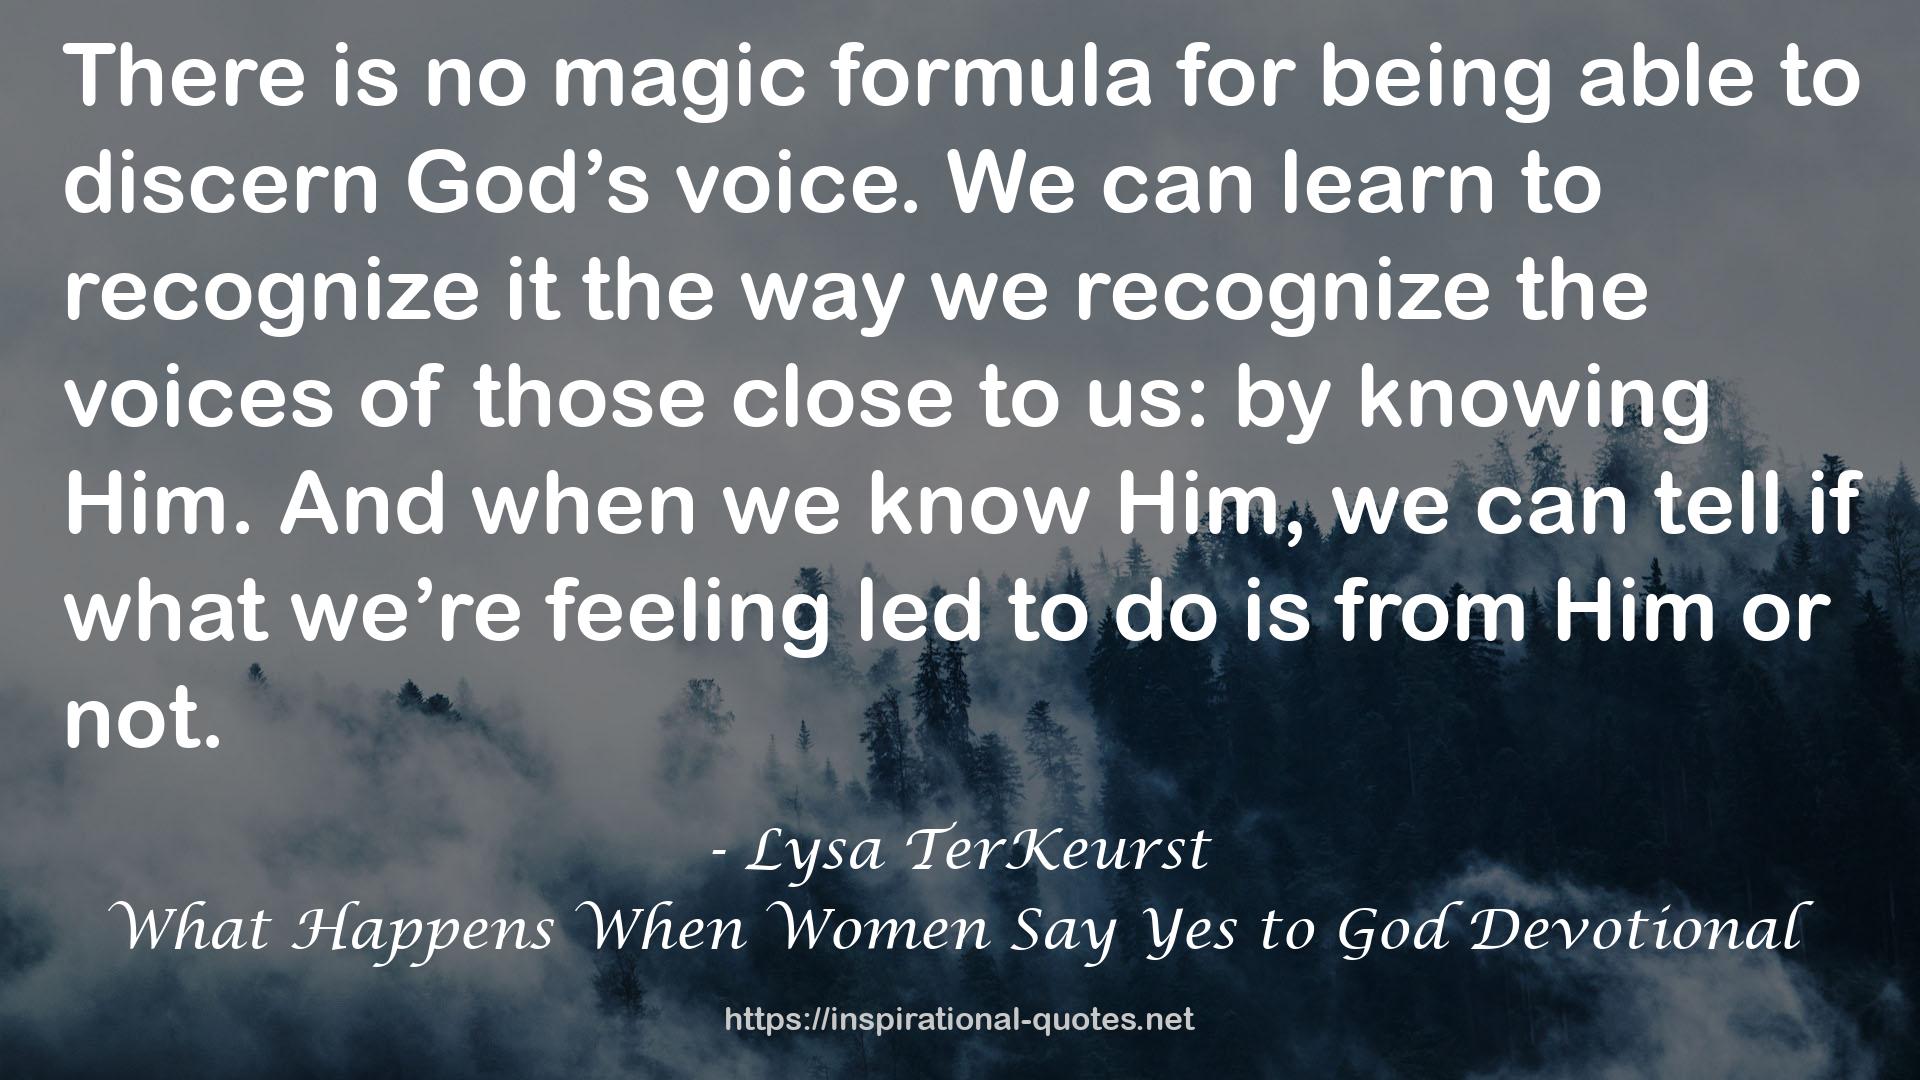 What Happens When Women Say Yes to God Devotional QUOTES